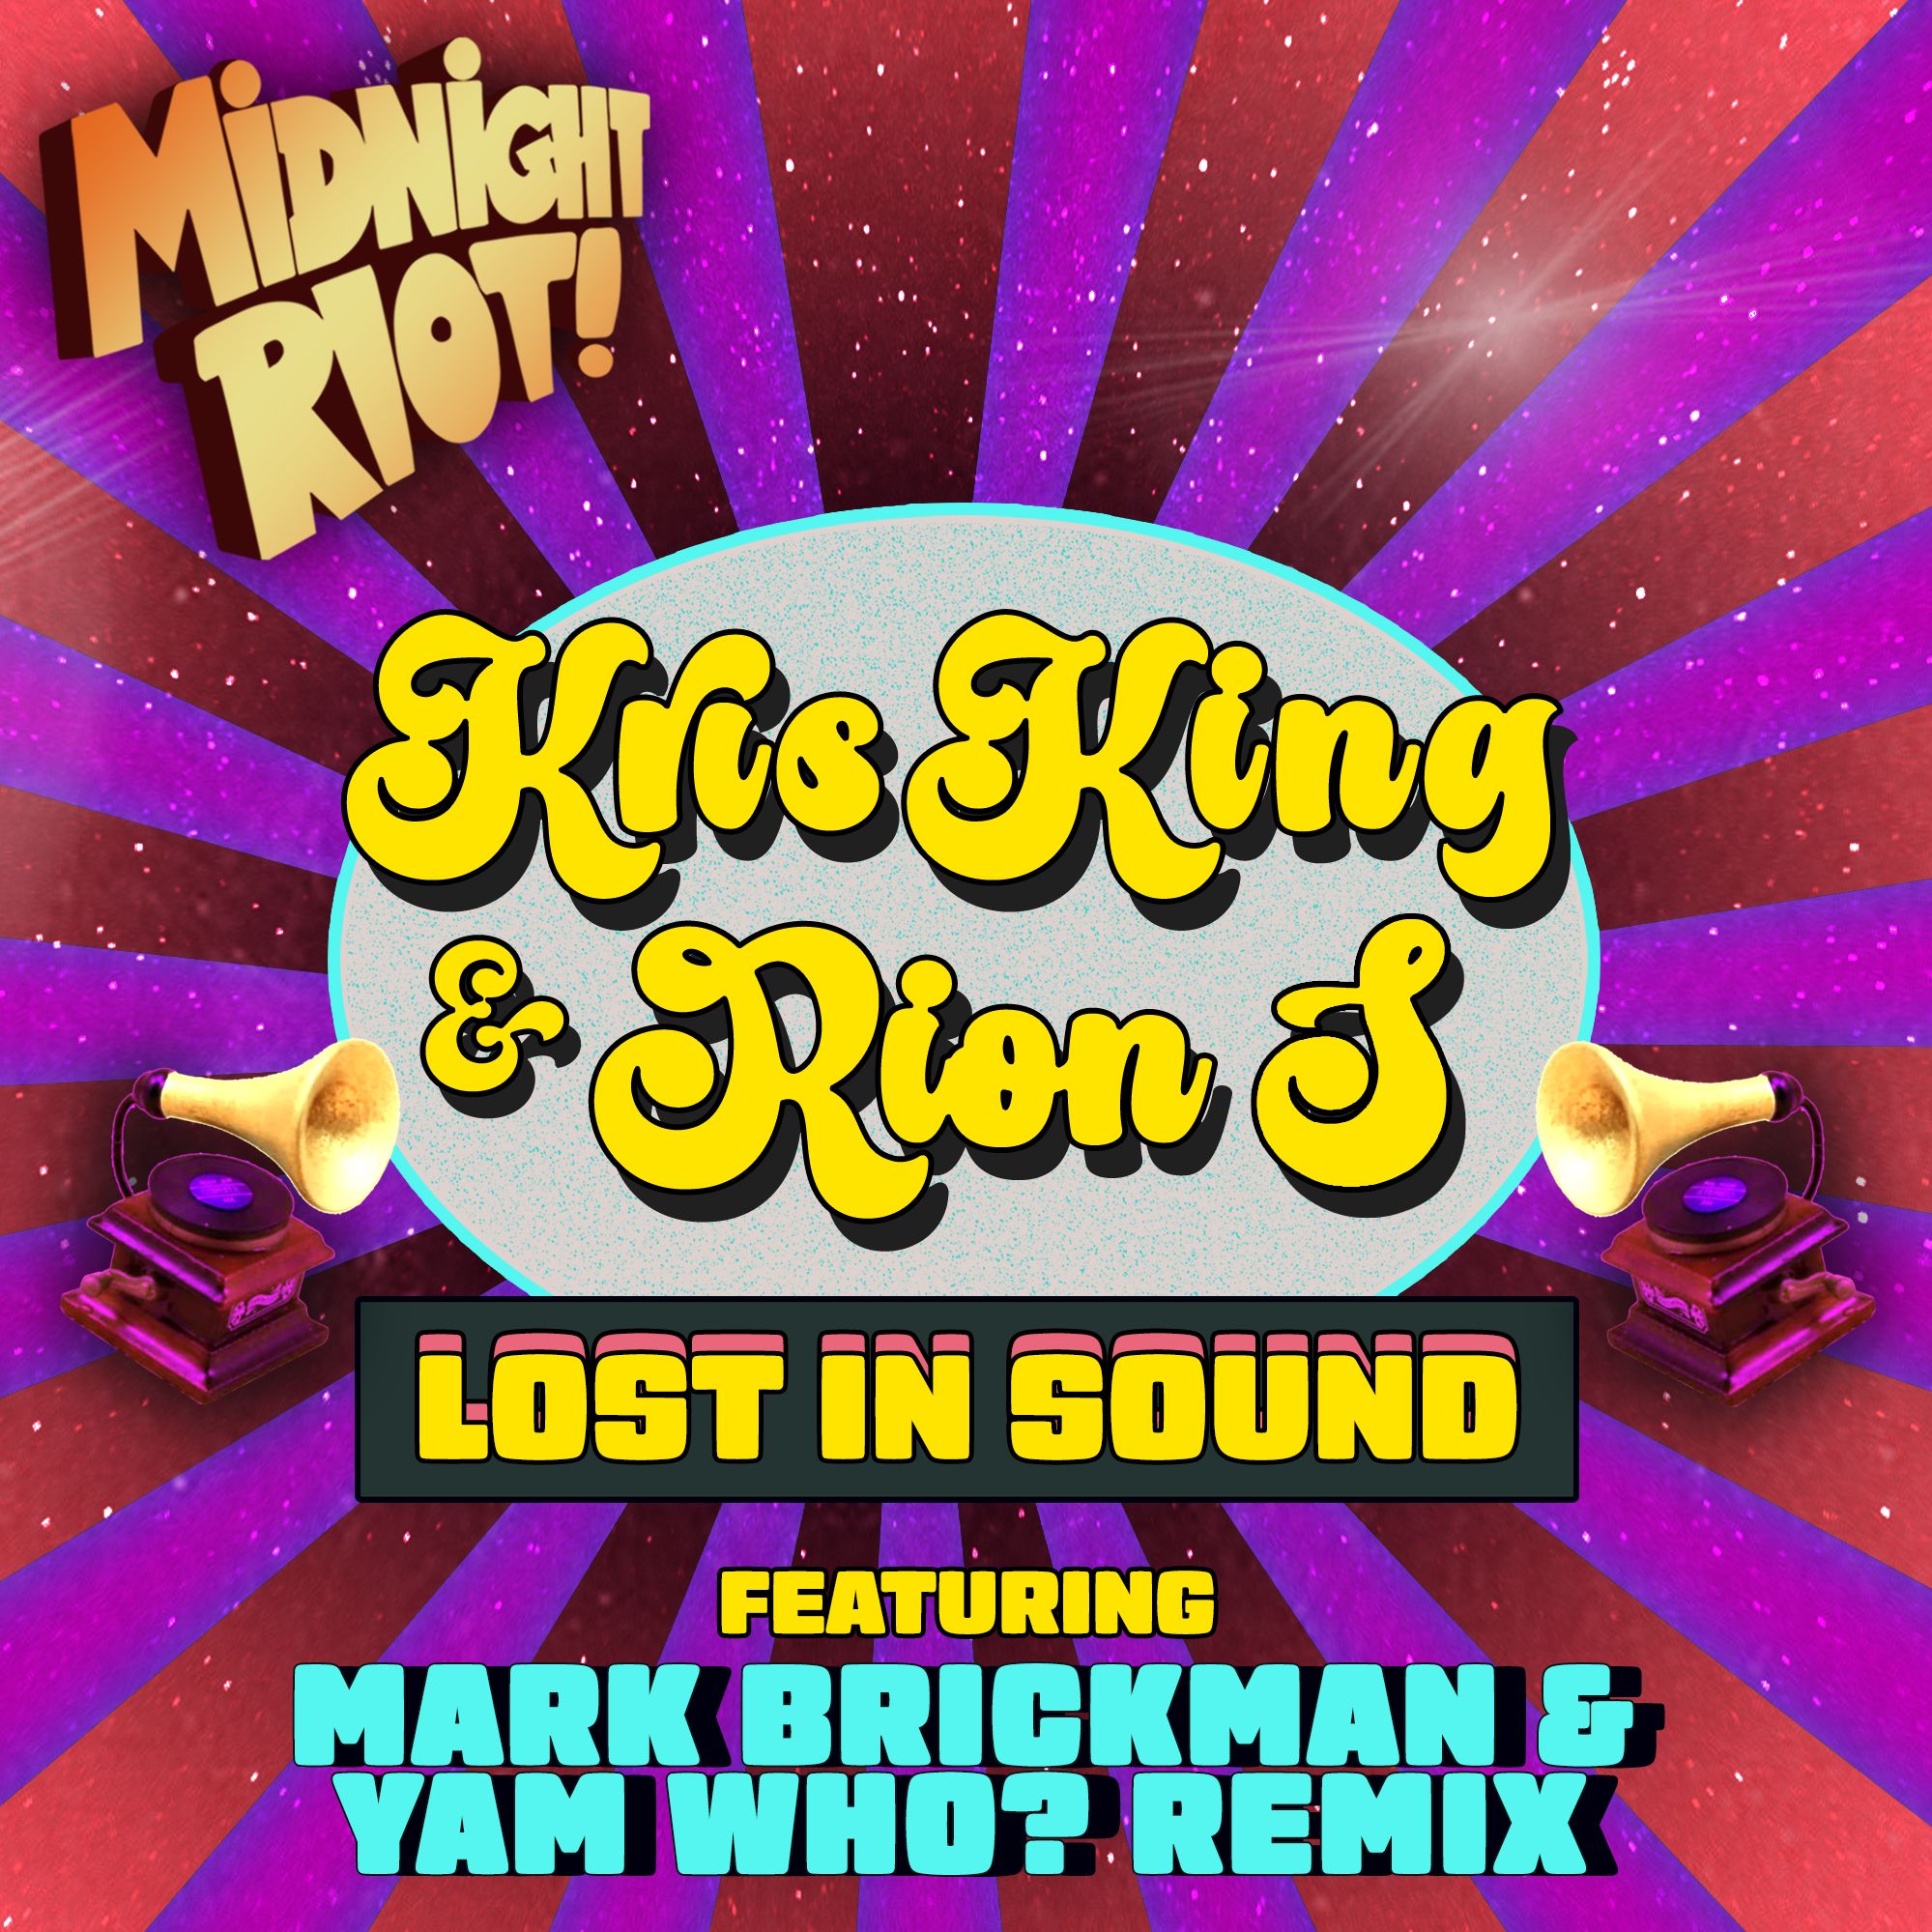 Kris King Feat Rion S - Lost In Sound Mark Brickman & Yam Who? Remix (teaser)